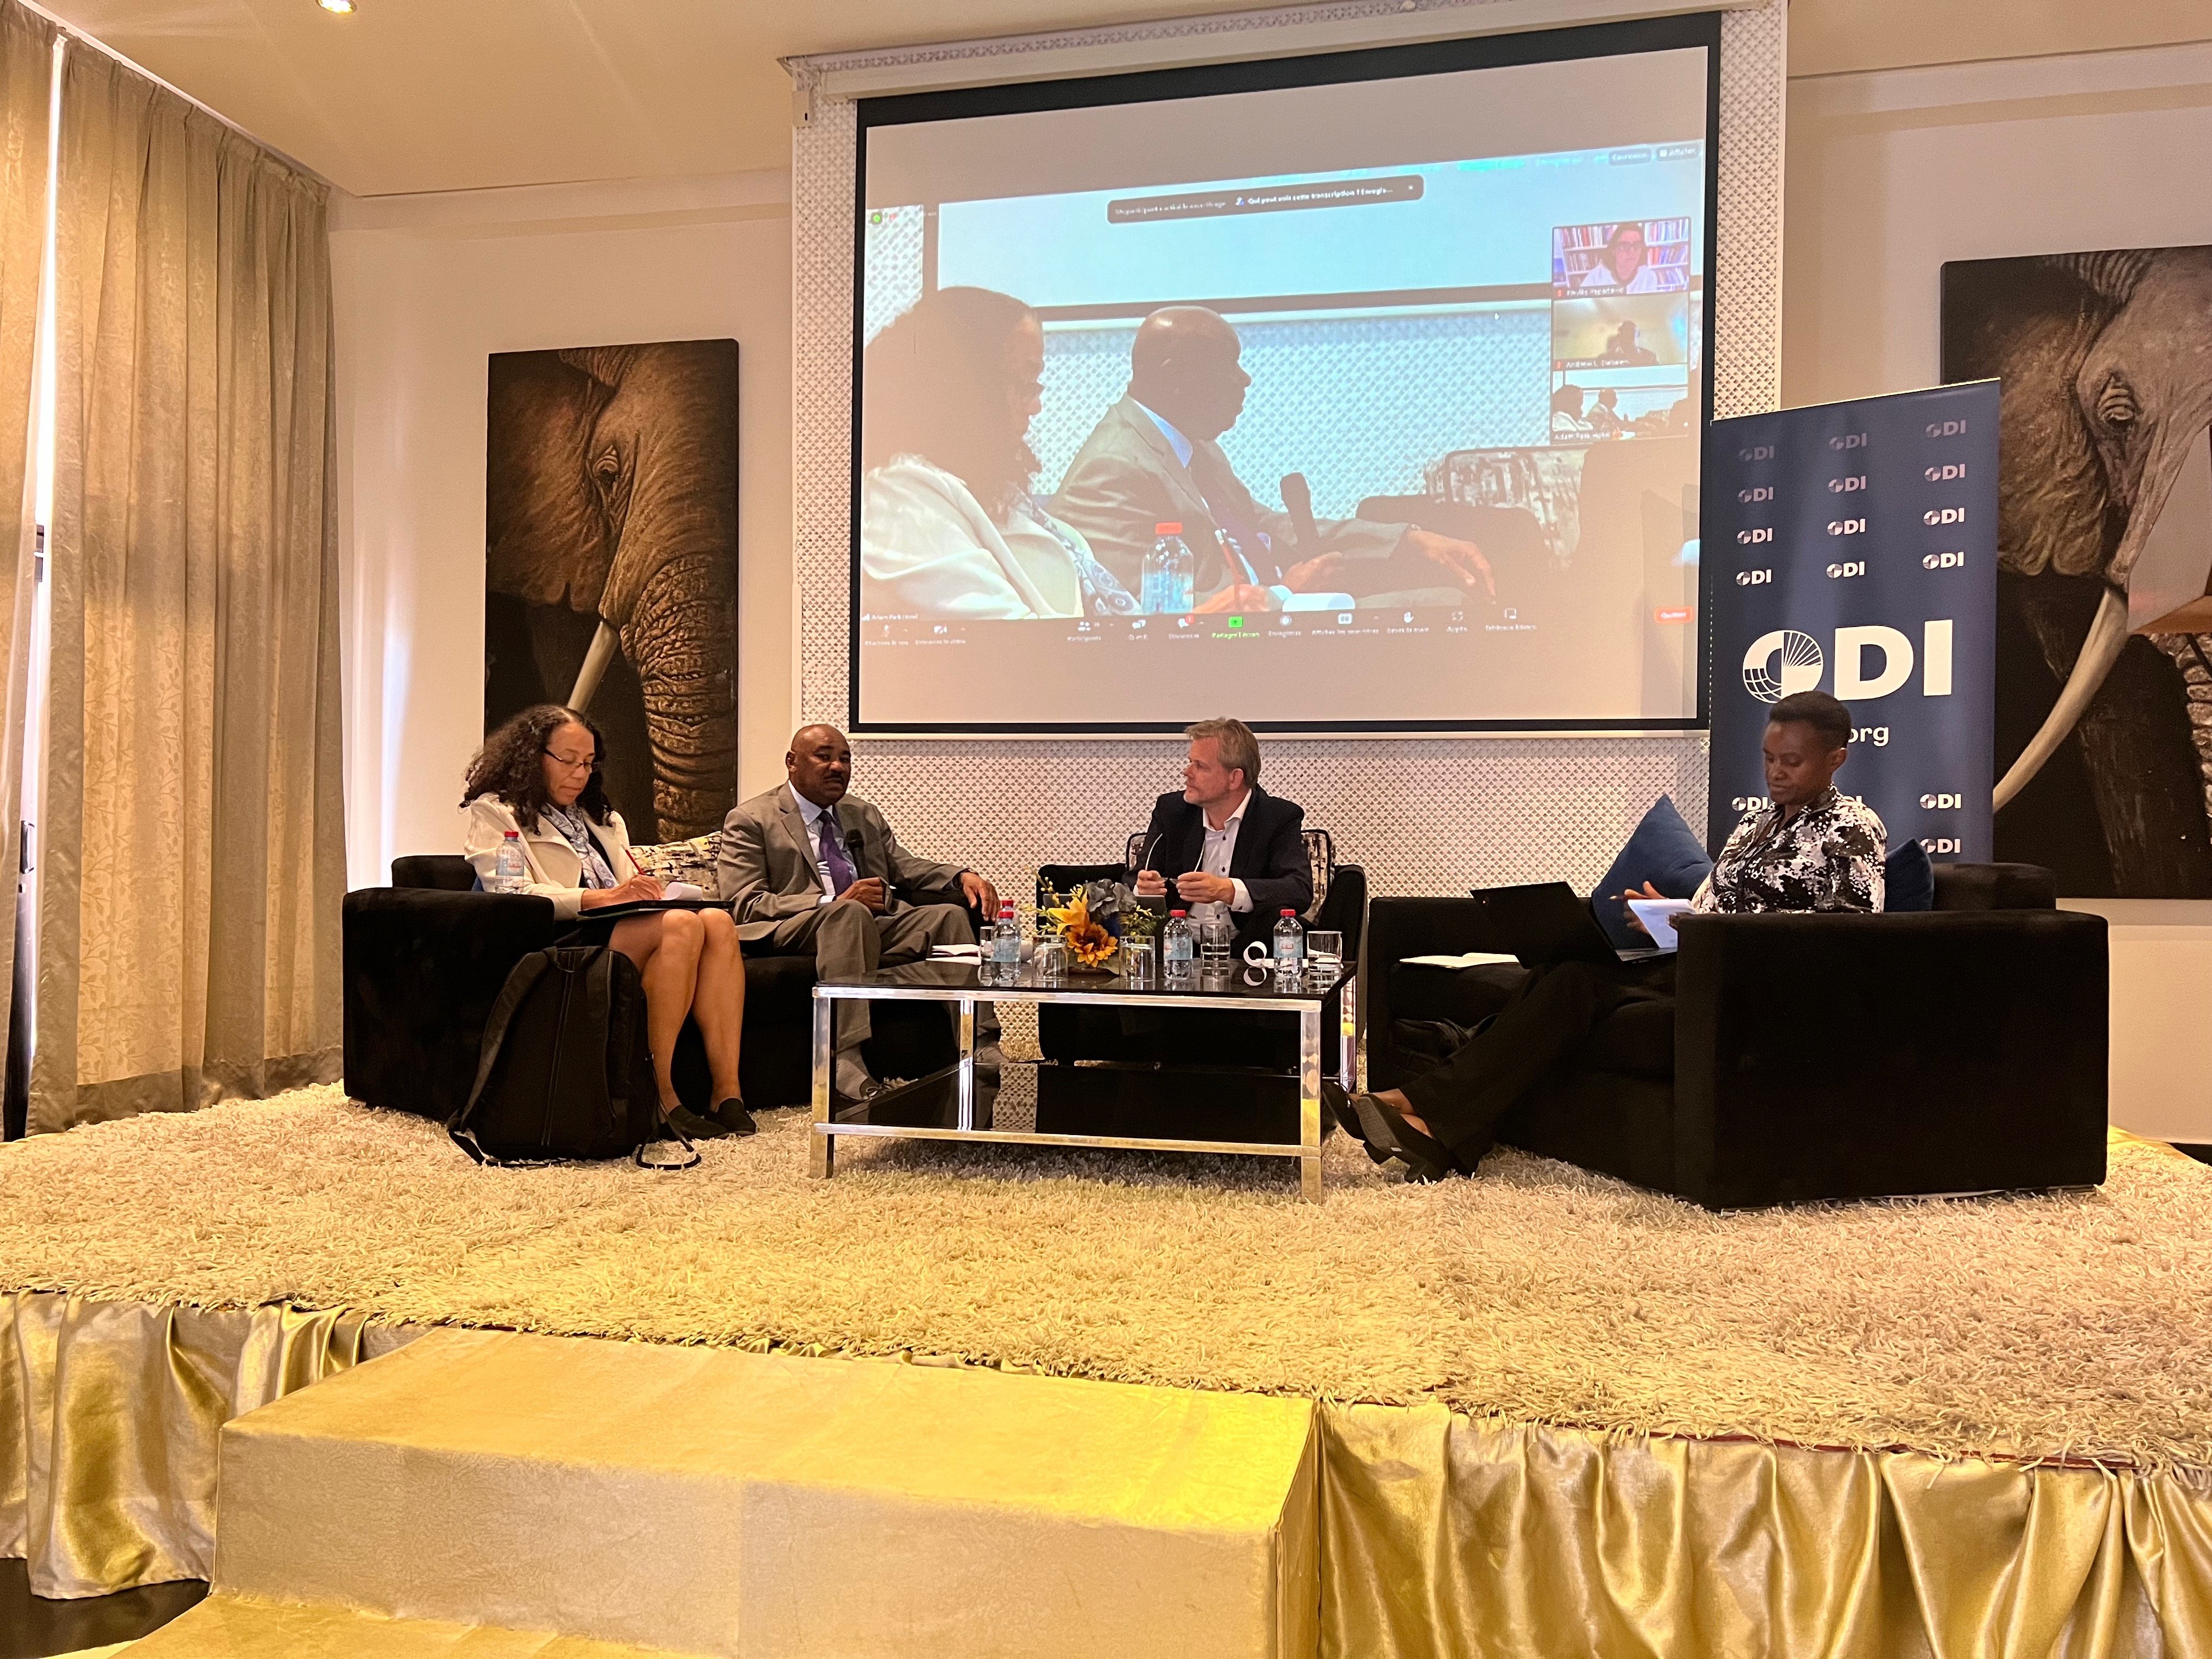 SITA Director, Dirk Willem (centre) chairing a session on Resilience-building in Africa with Catherine Anne Maria Pattillo (IMF), Dr Ibrahim El Badawi (Economic Research Forum) and Dianah Muchai (African Economic Research Consortium)